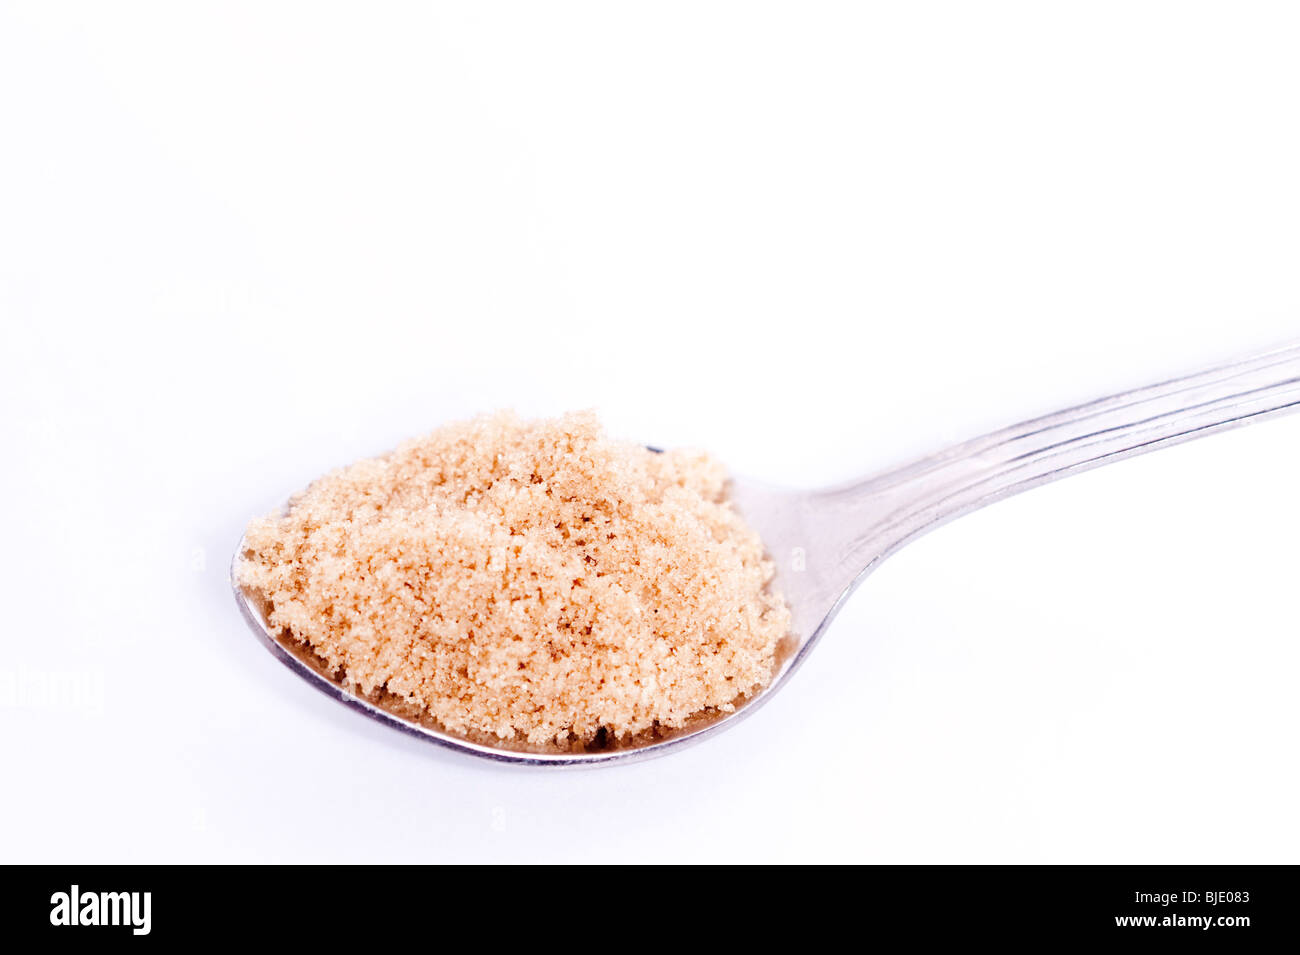 A spoonful of demerara cane sugar on a white background Stock Photo